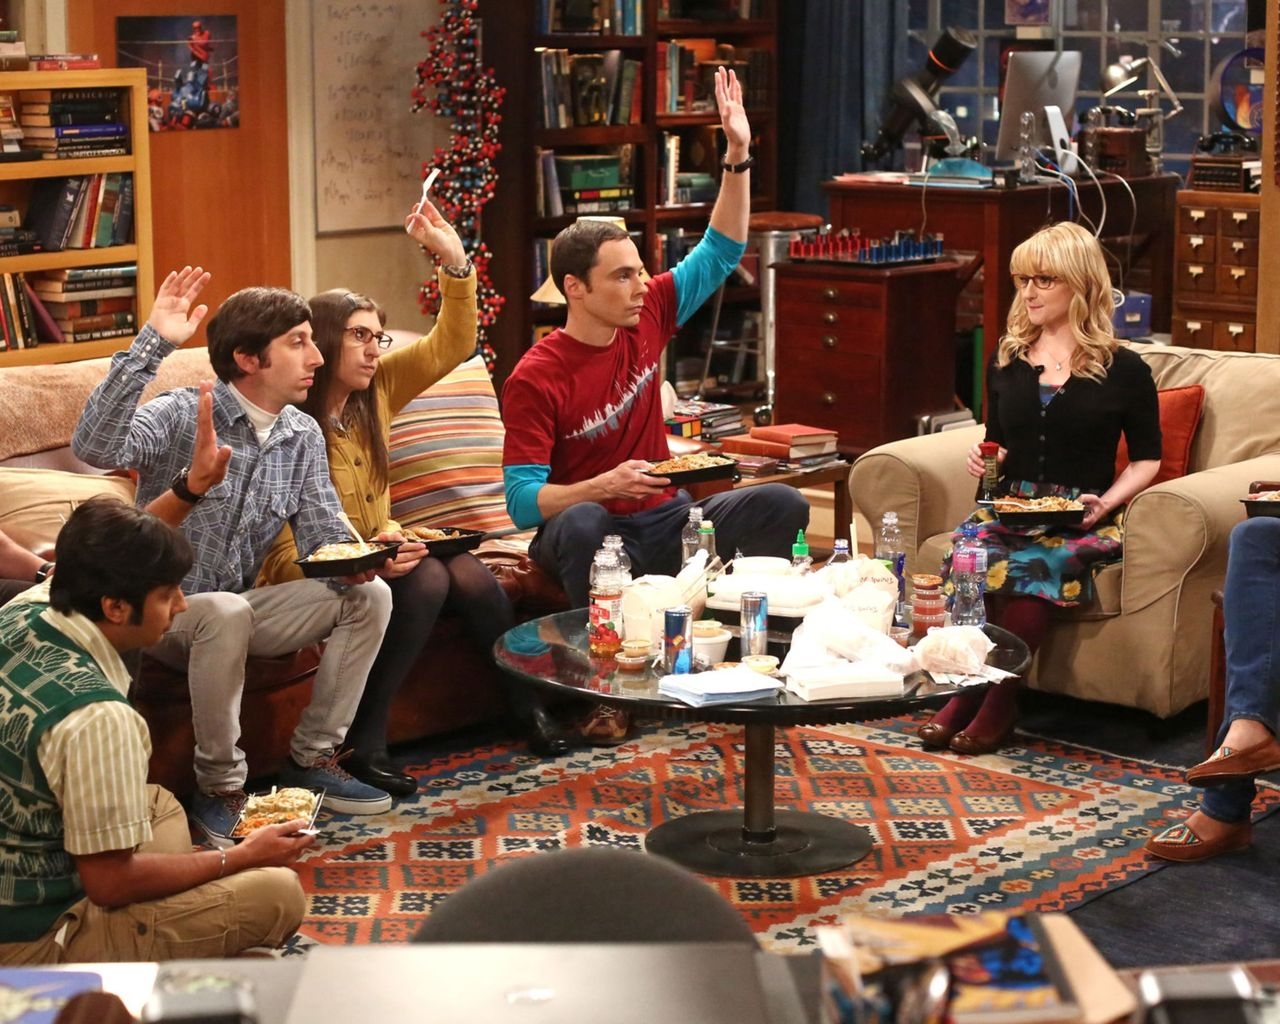 The Big Bang Theory Scene for 1280 x 1024 resolution